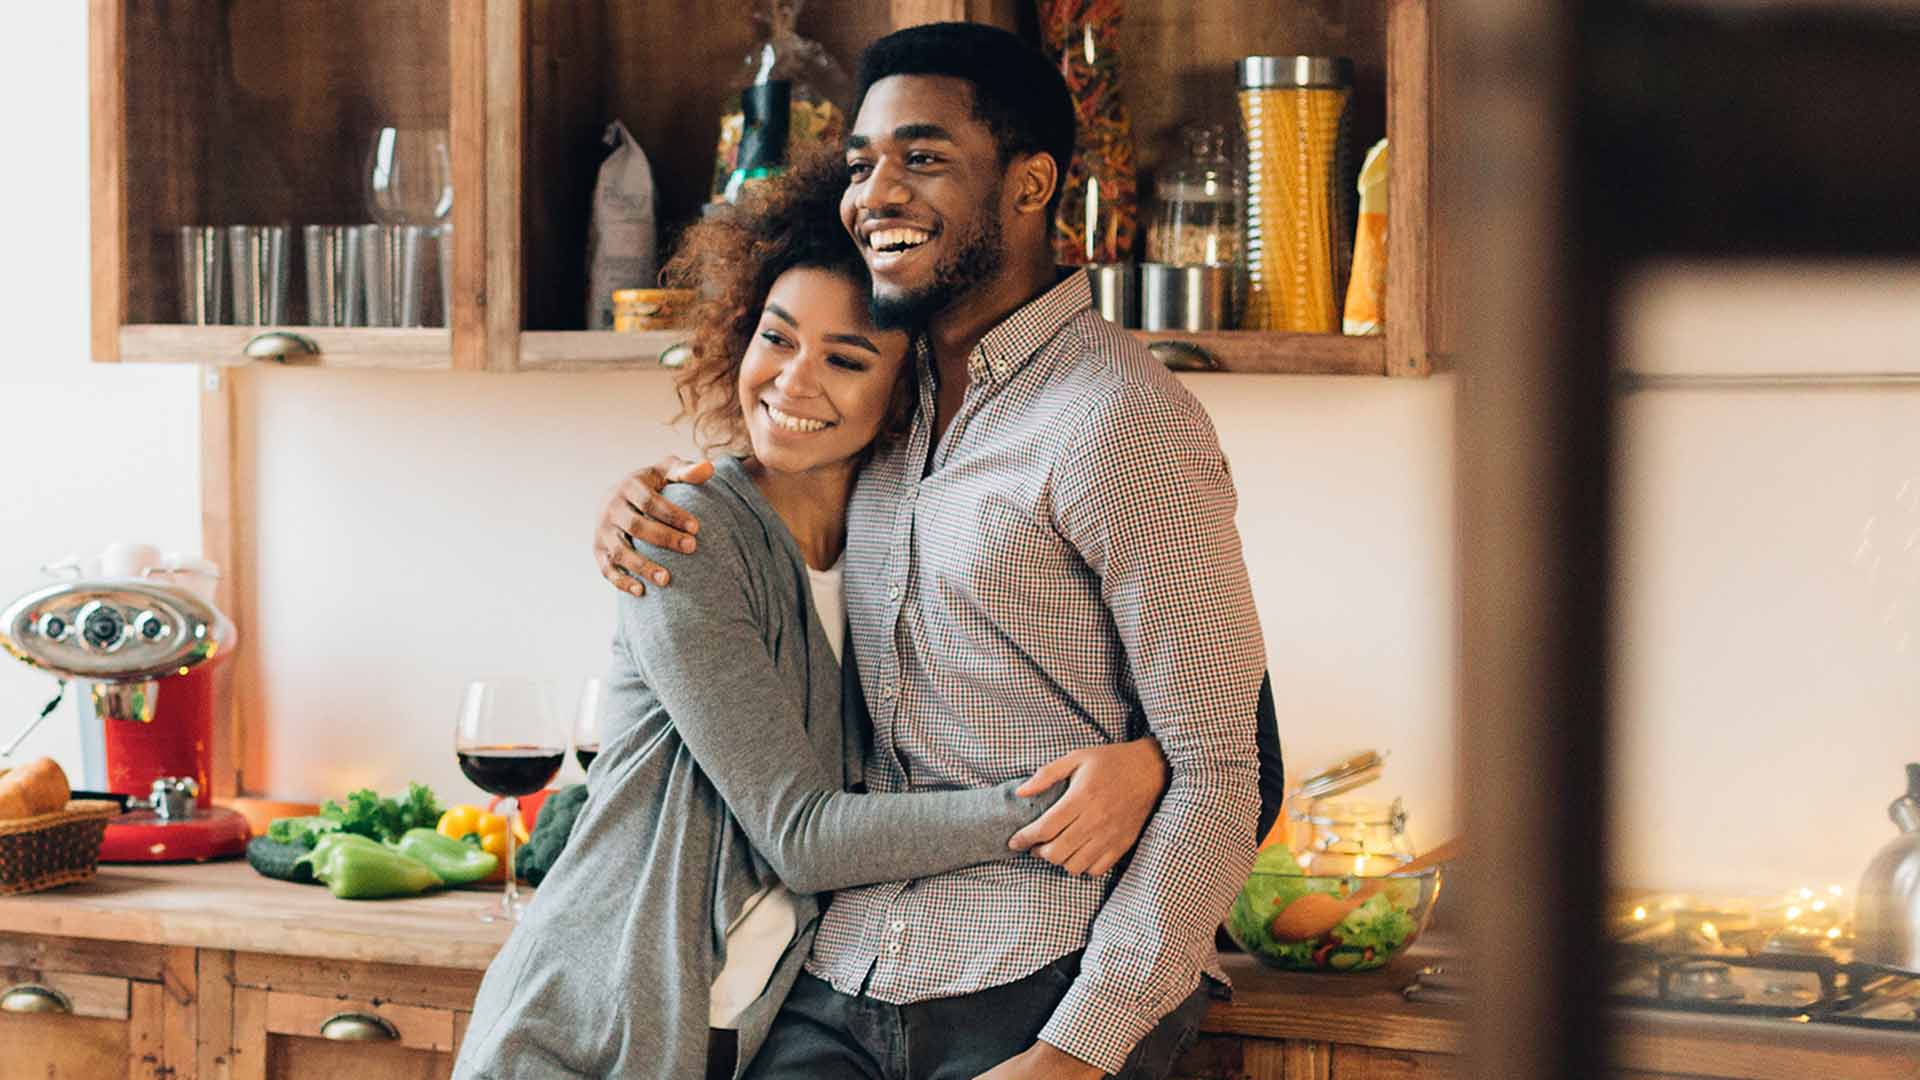 Young couple embracing in kitchen